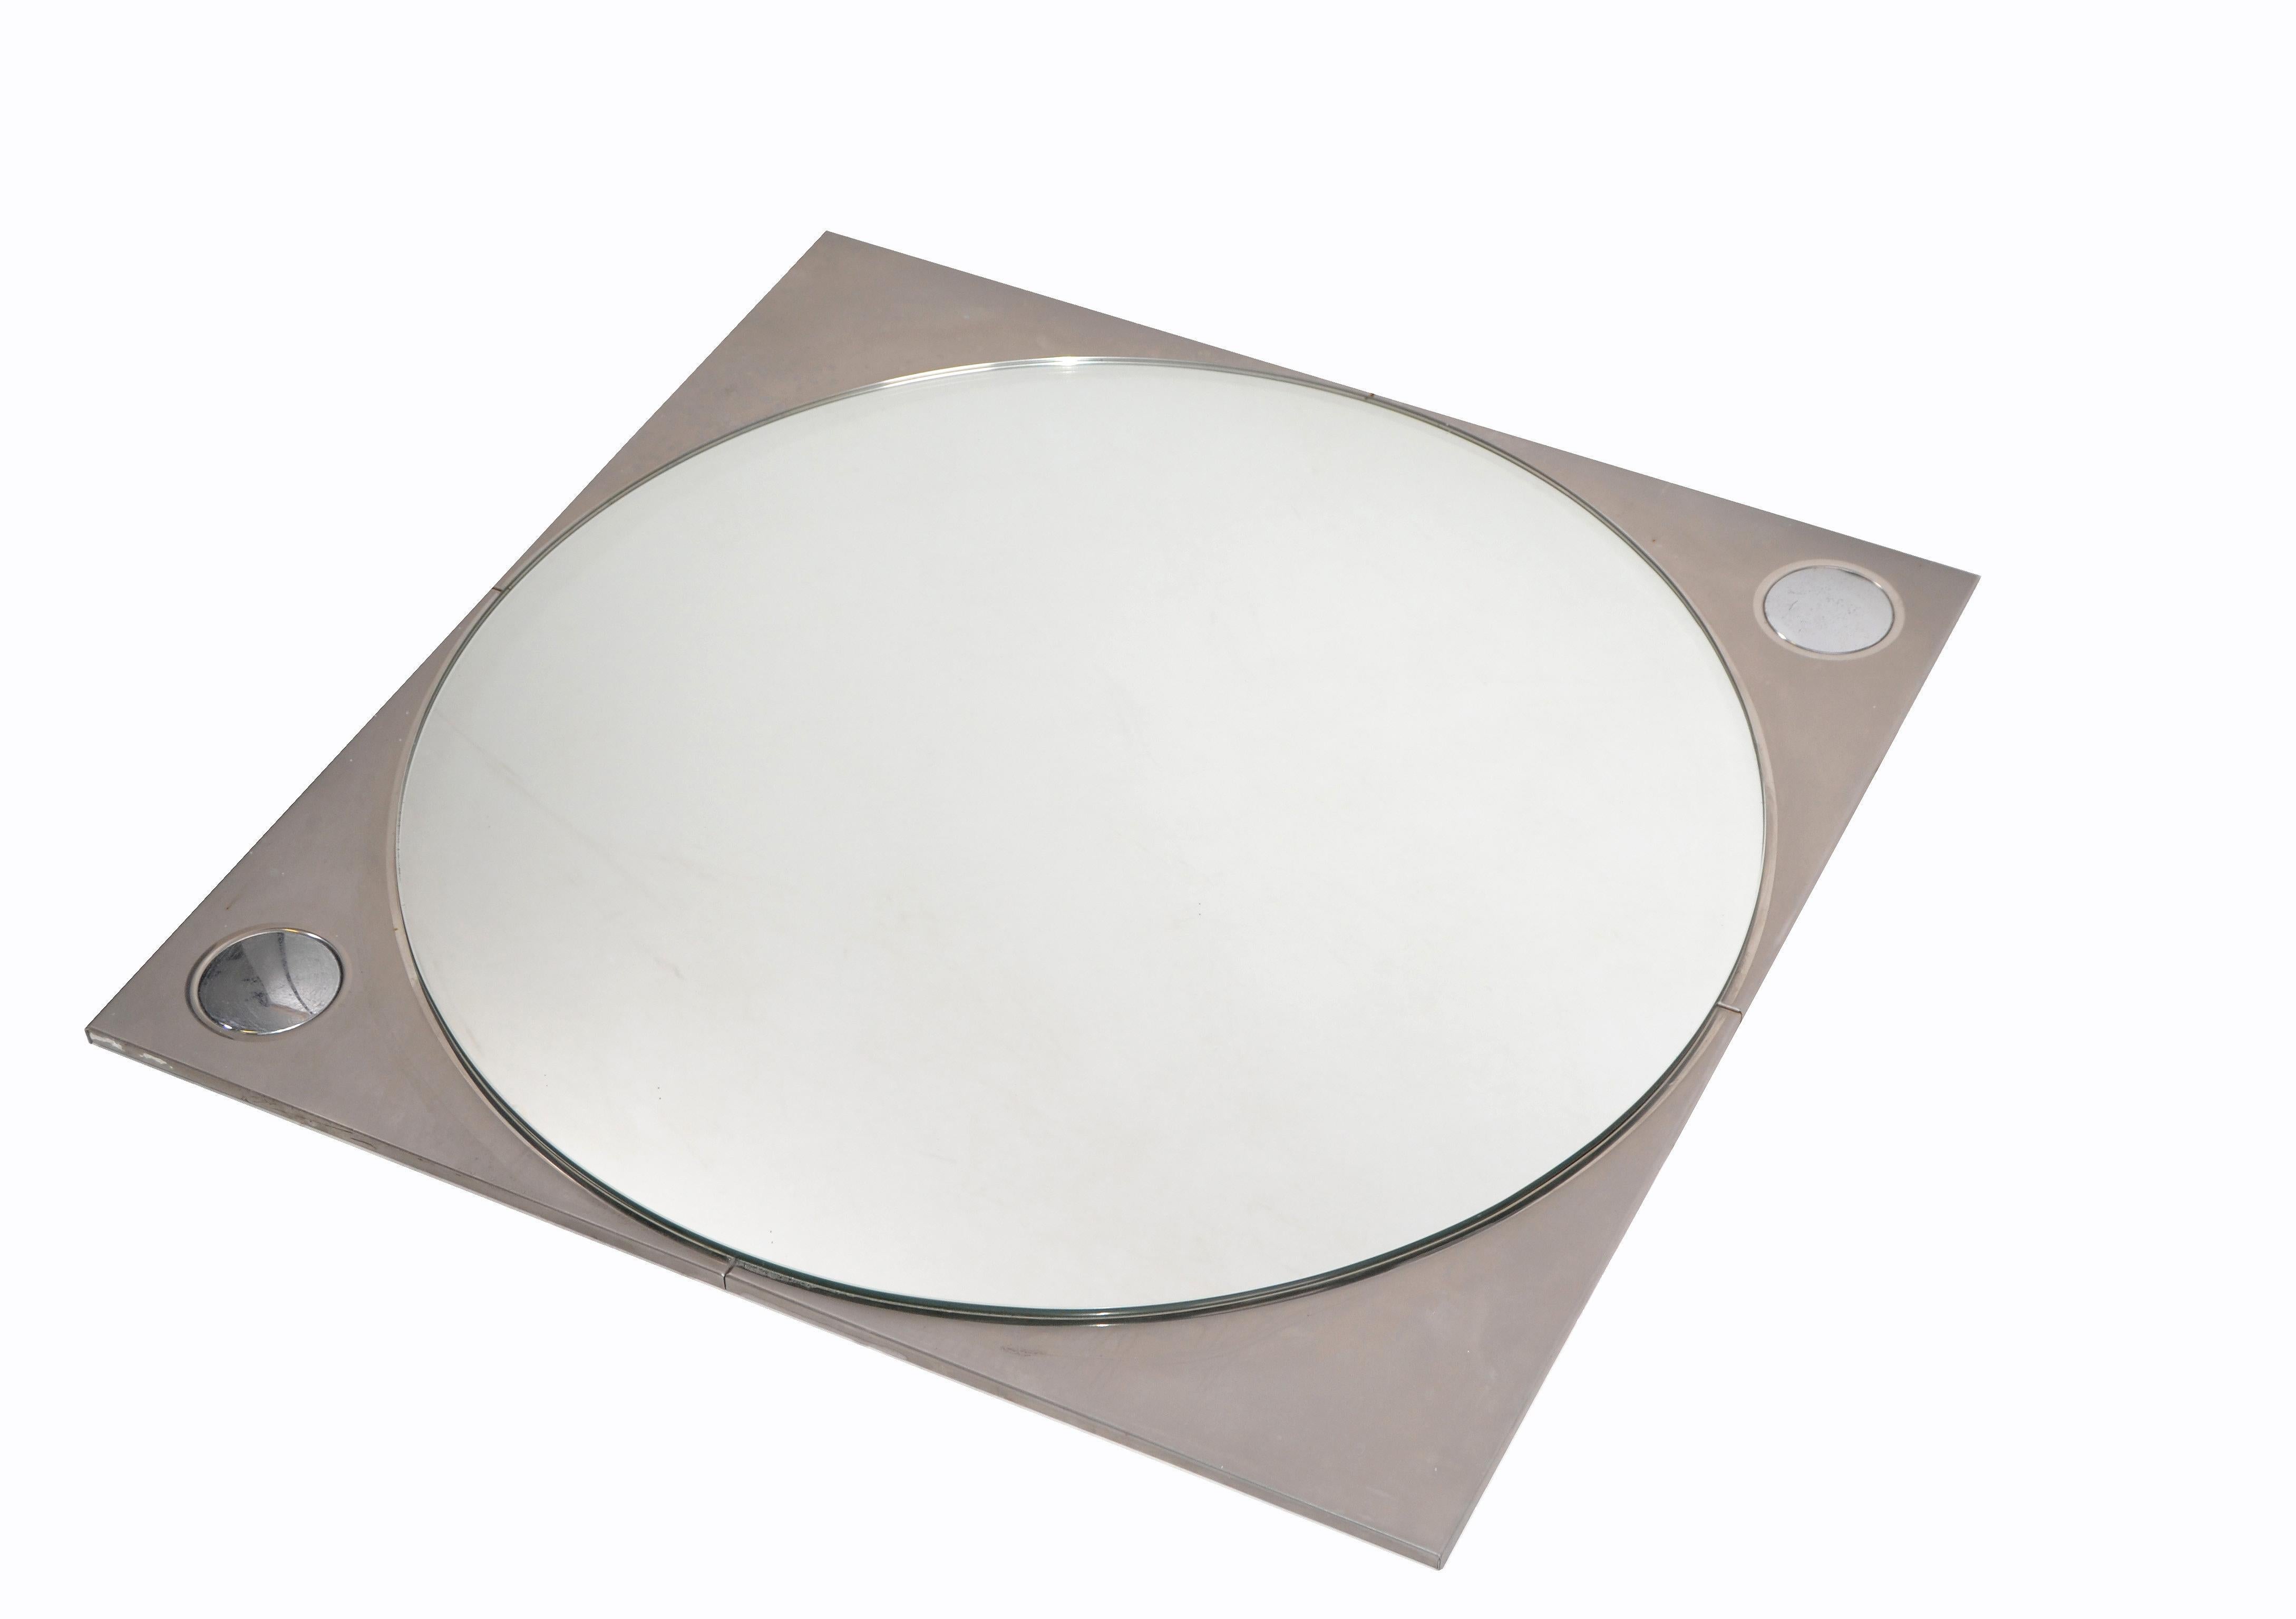 Late 20th Century French Mid-Century Modern Square Chrome Wall Mirror/ Convex Style Mirror For Sale